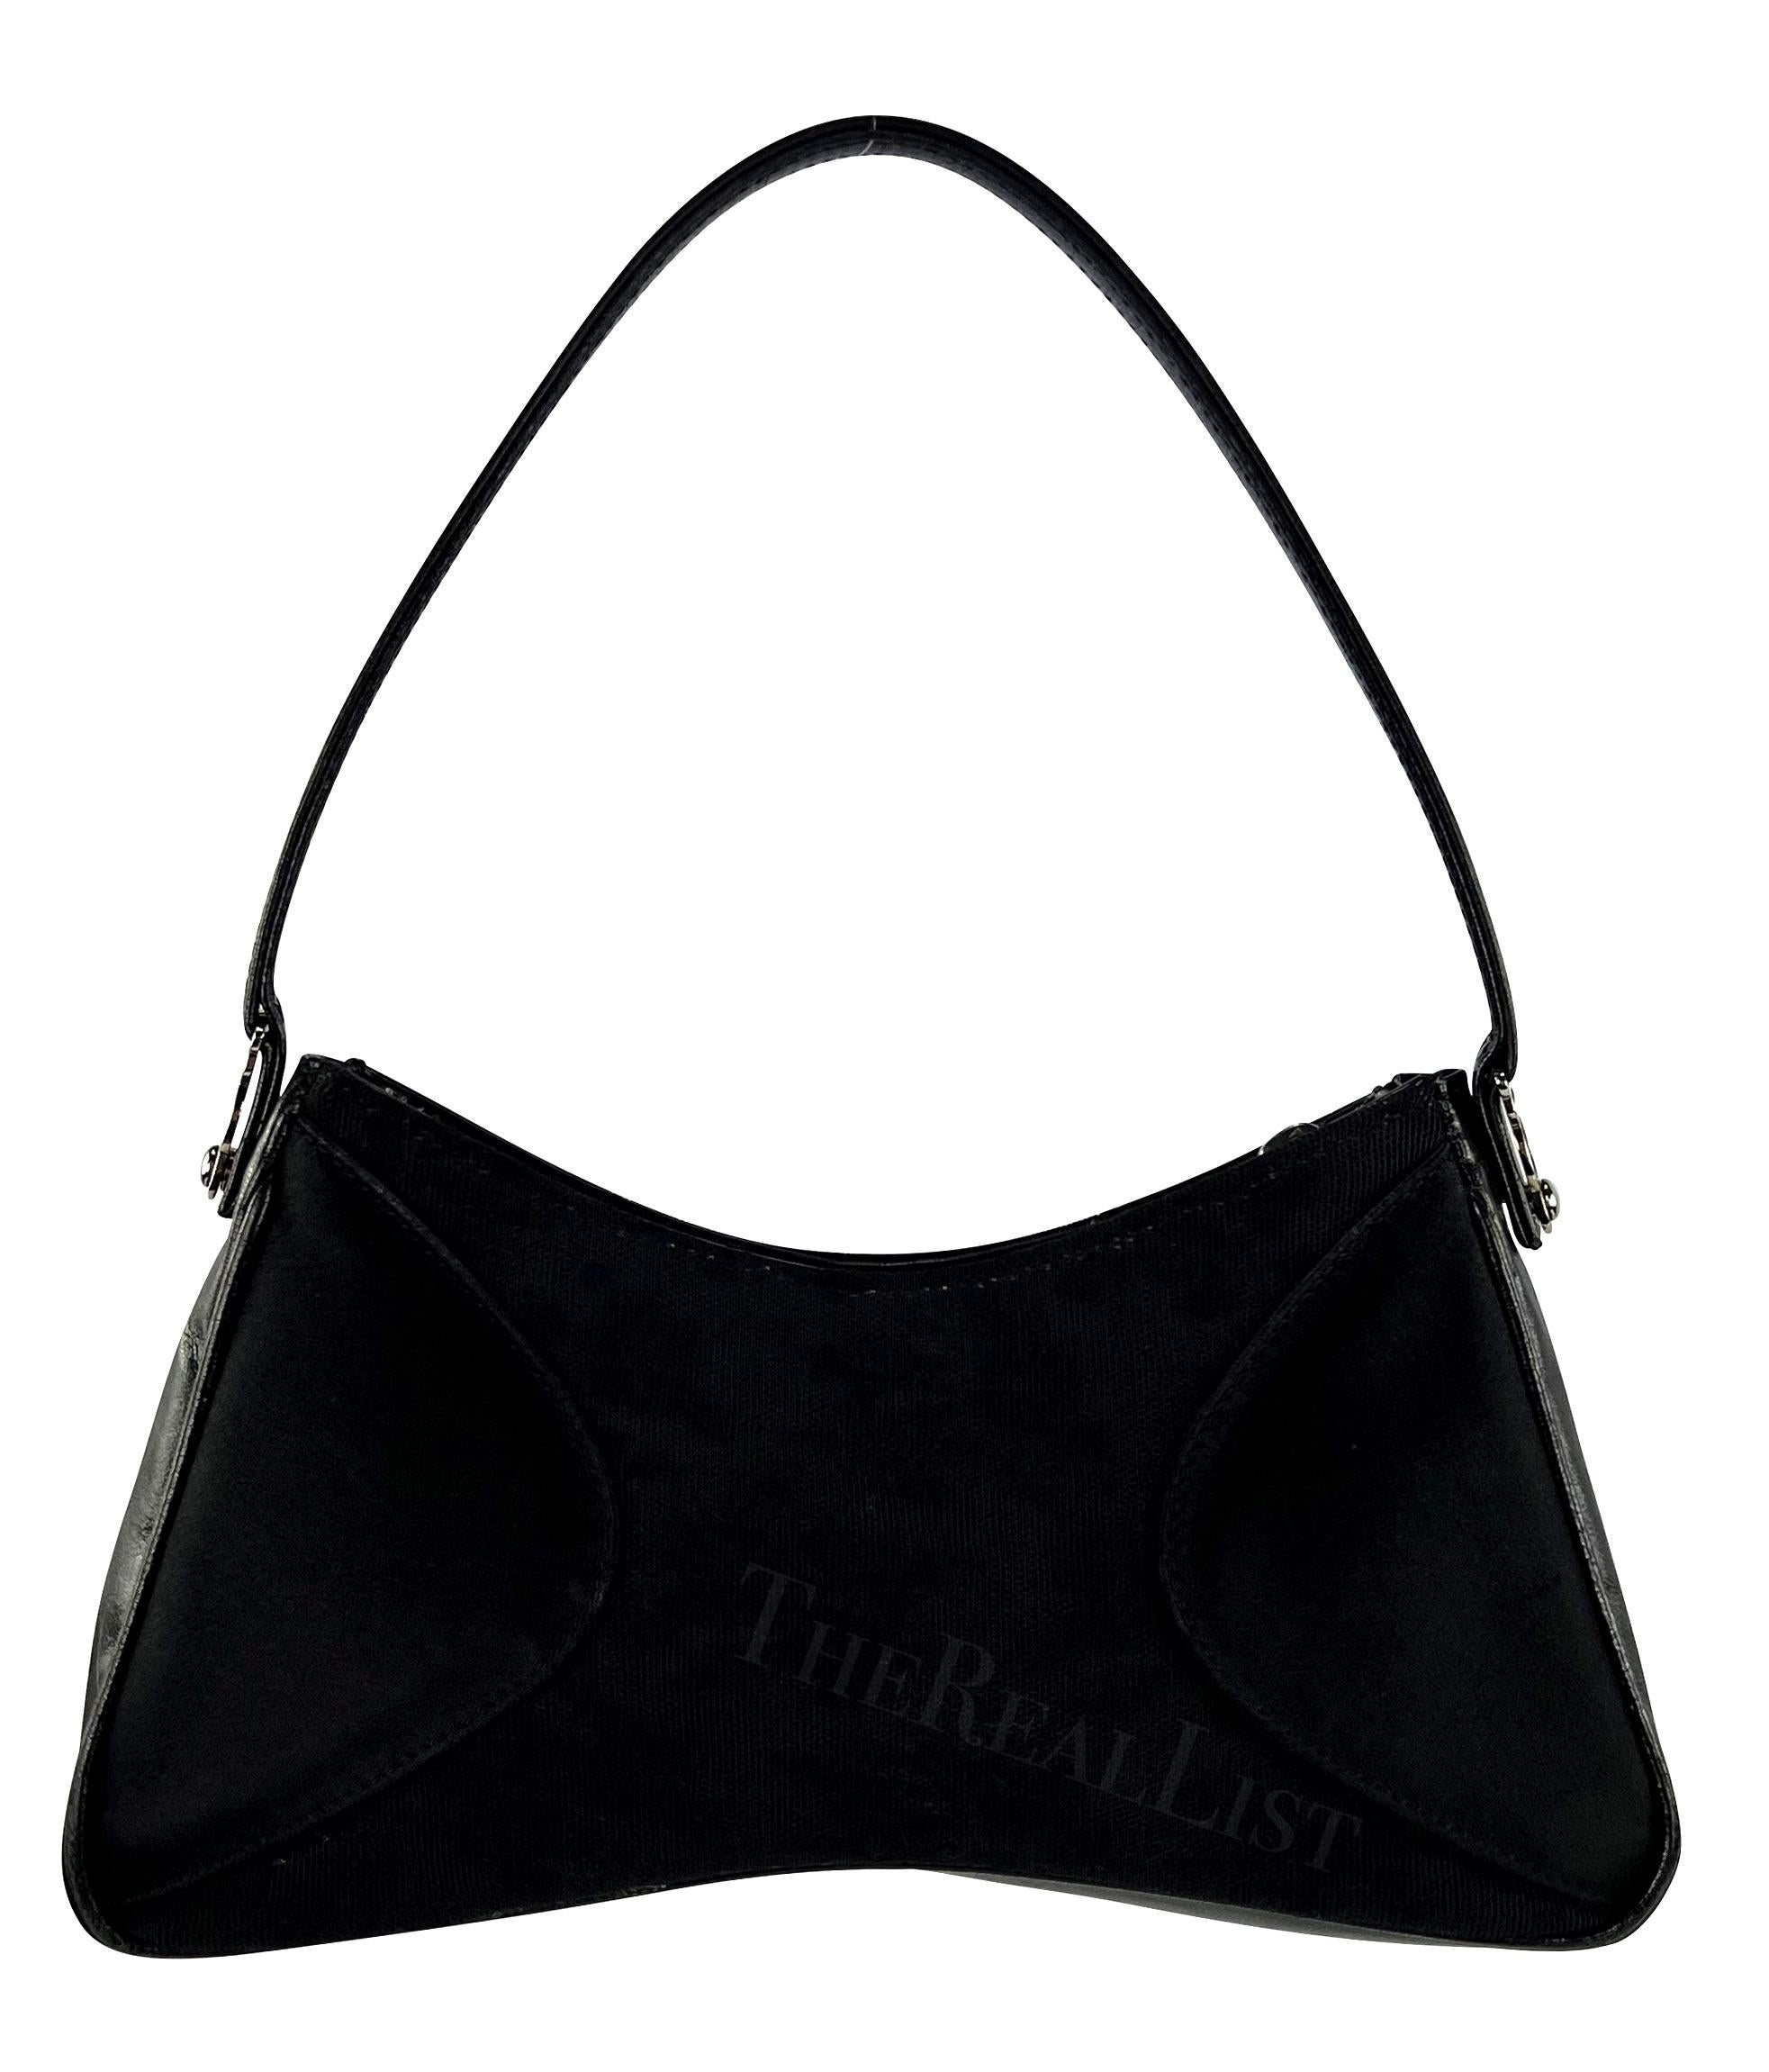 Early 2000s John Galliano Black Satin Leather Corset Style Mini Bag In Good Condition For Sale In West Hollywood, CA